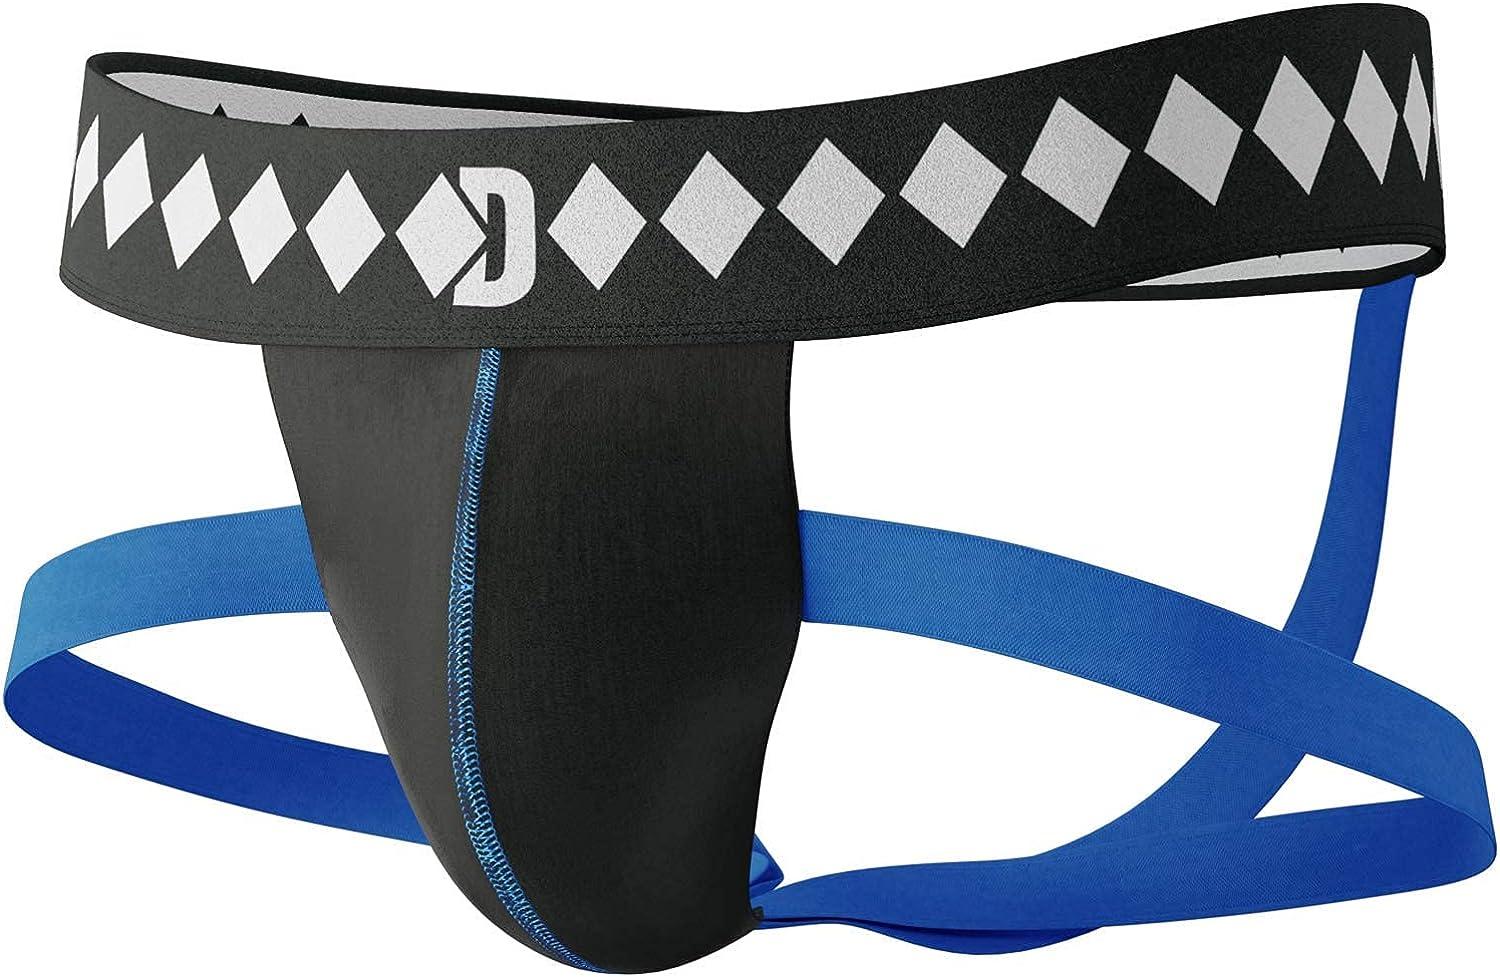 Diamond MMA Jock Strap + Athletic Cup for Men, 4-Strap No Shift Athletic  Supporters for Men with Cup for MMA, Boxing, Muay Thai, Wrestling, Jiu  Jitsu